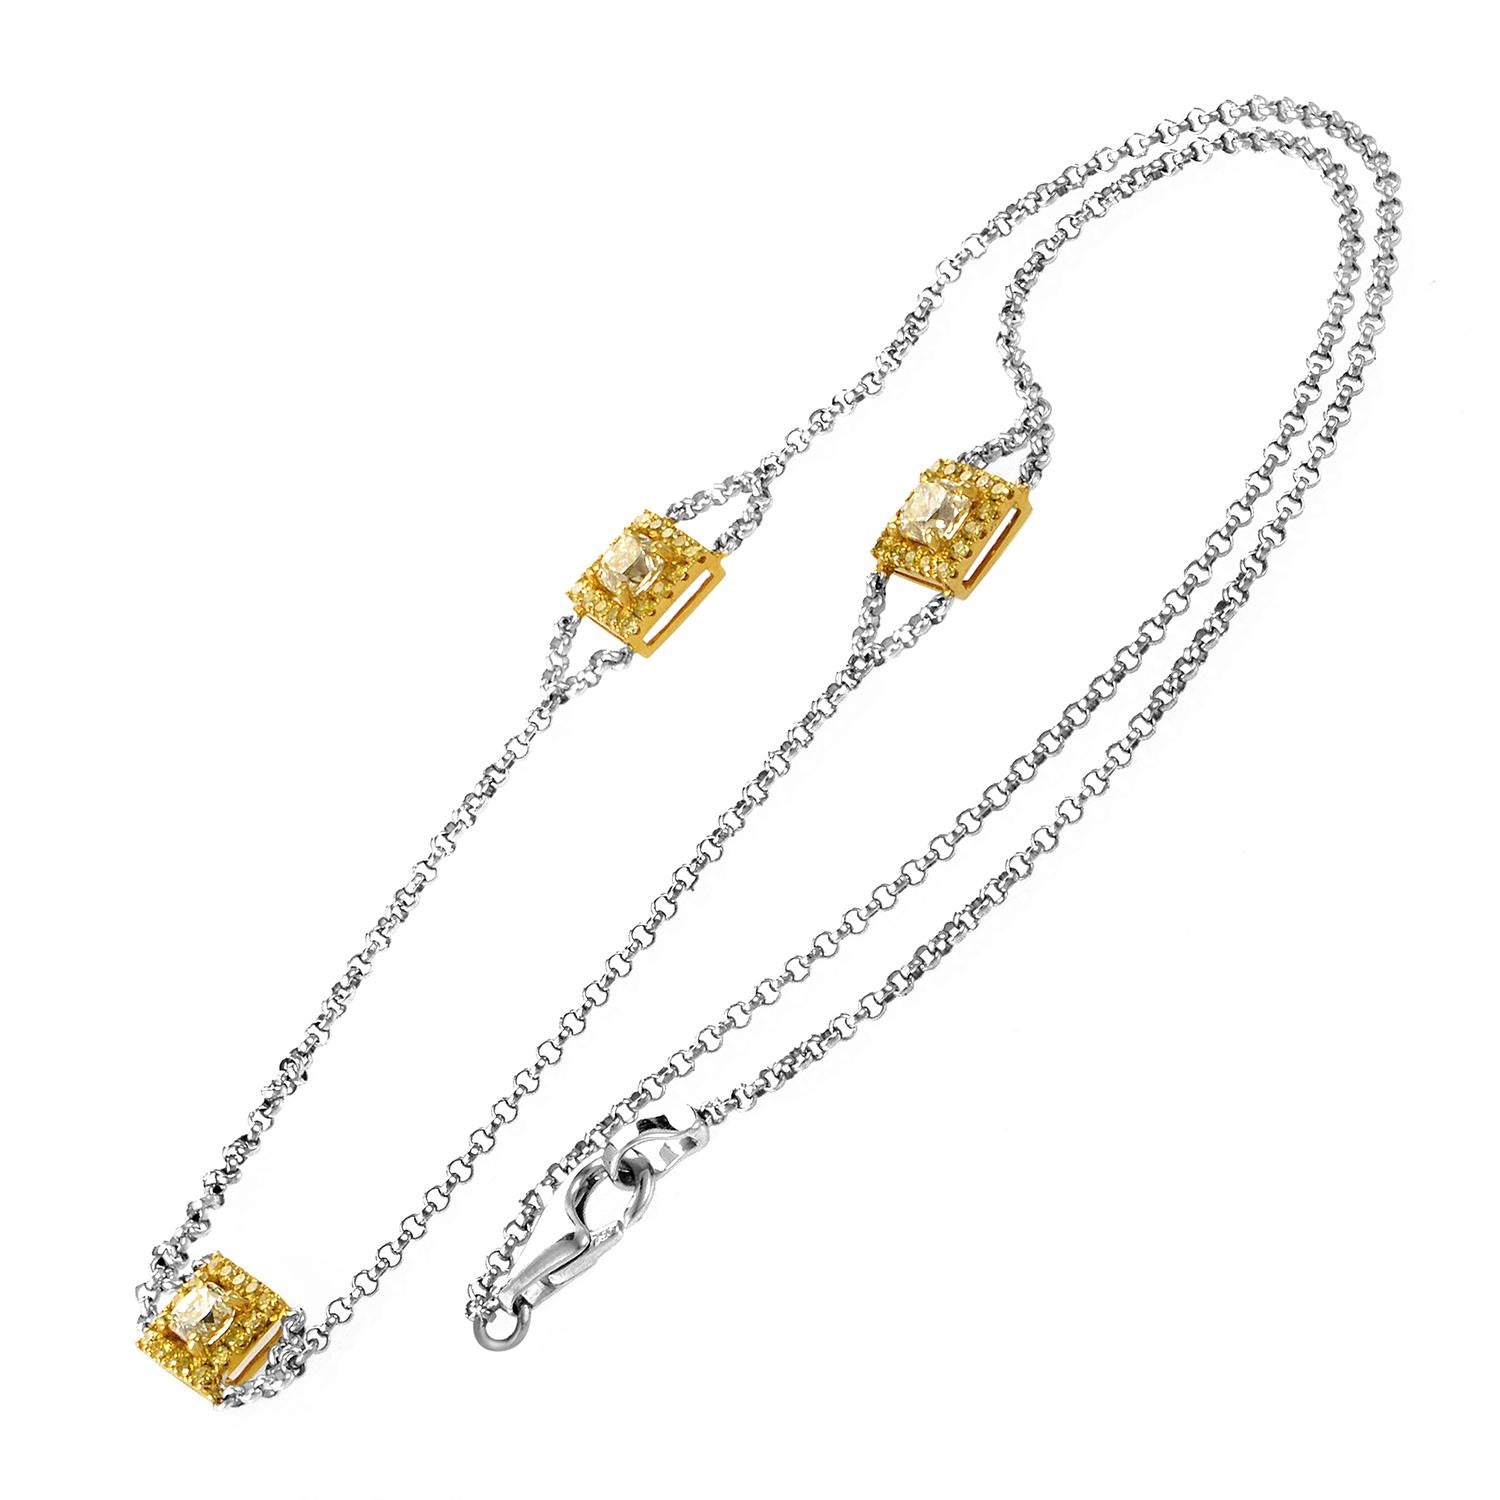 A touch of luxury to the power of three. Links of 18K White Gold are the connecting thread between three Yelllow Gold pendants. Each petite setting frames a bursting 1.40ct diamond setting.
